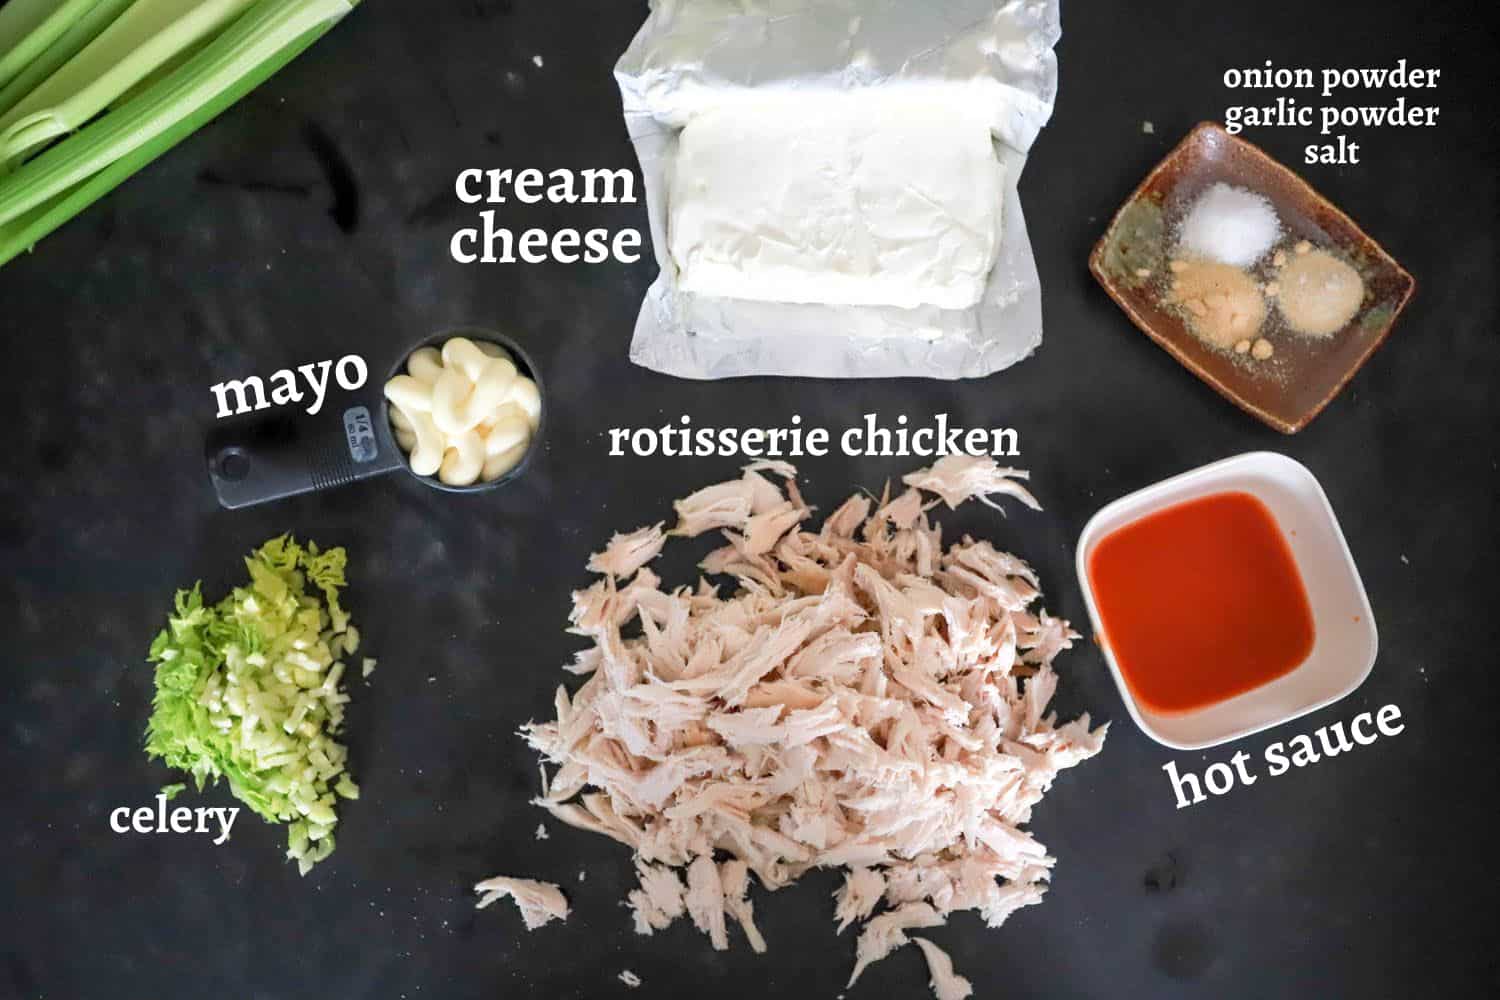 ingredients for cold buffalo chicken dip on black board.